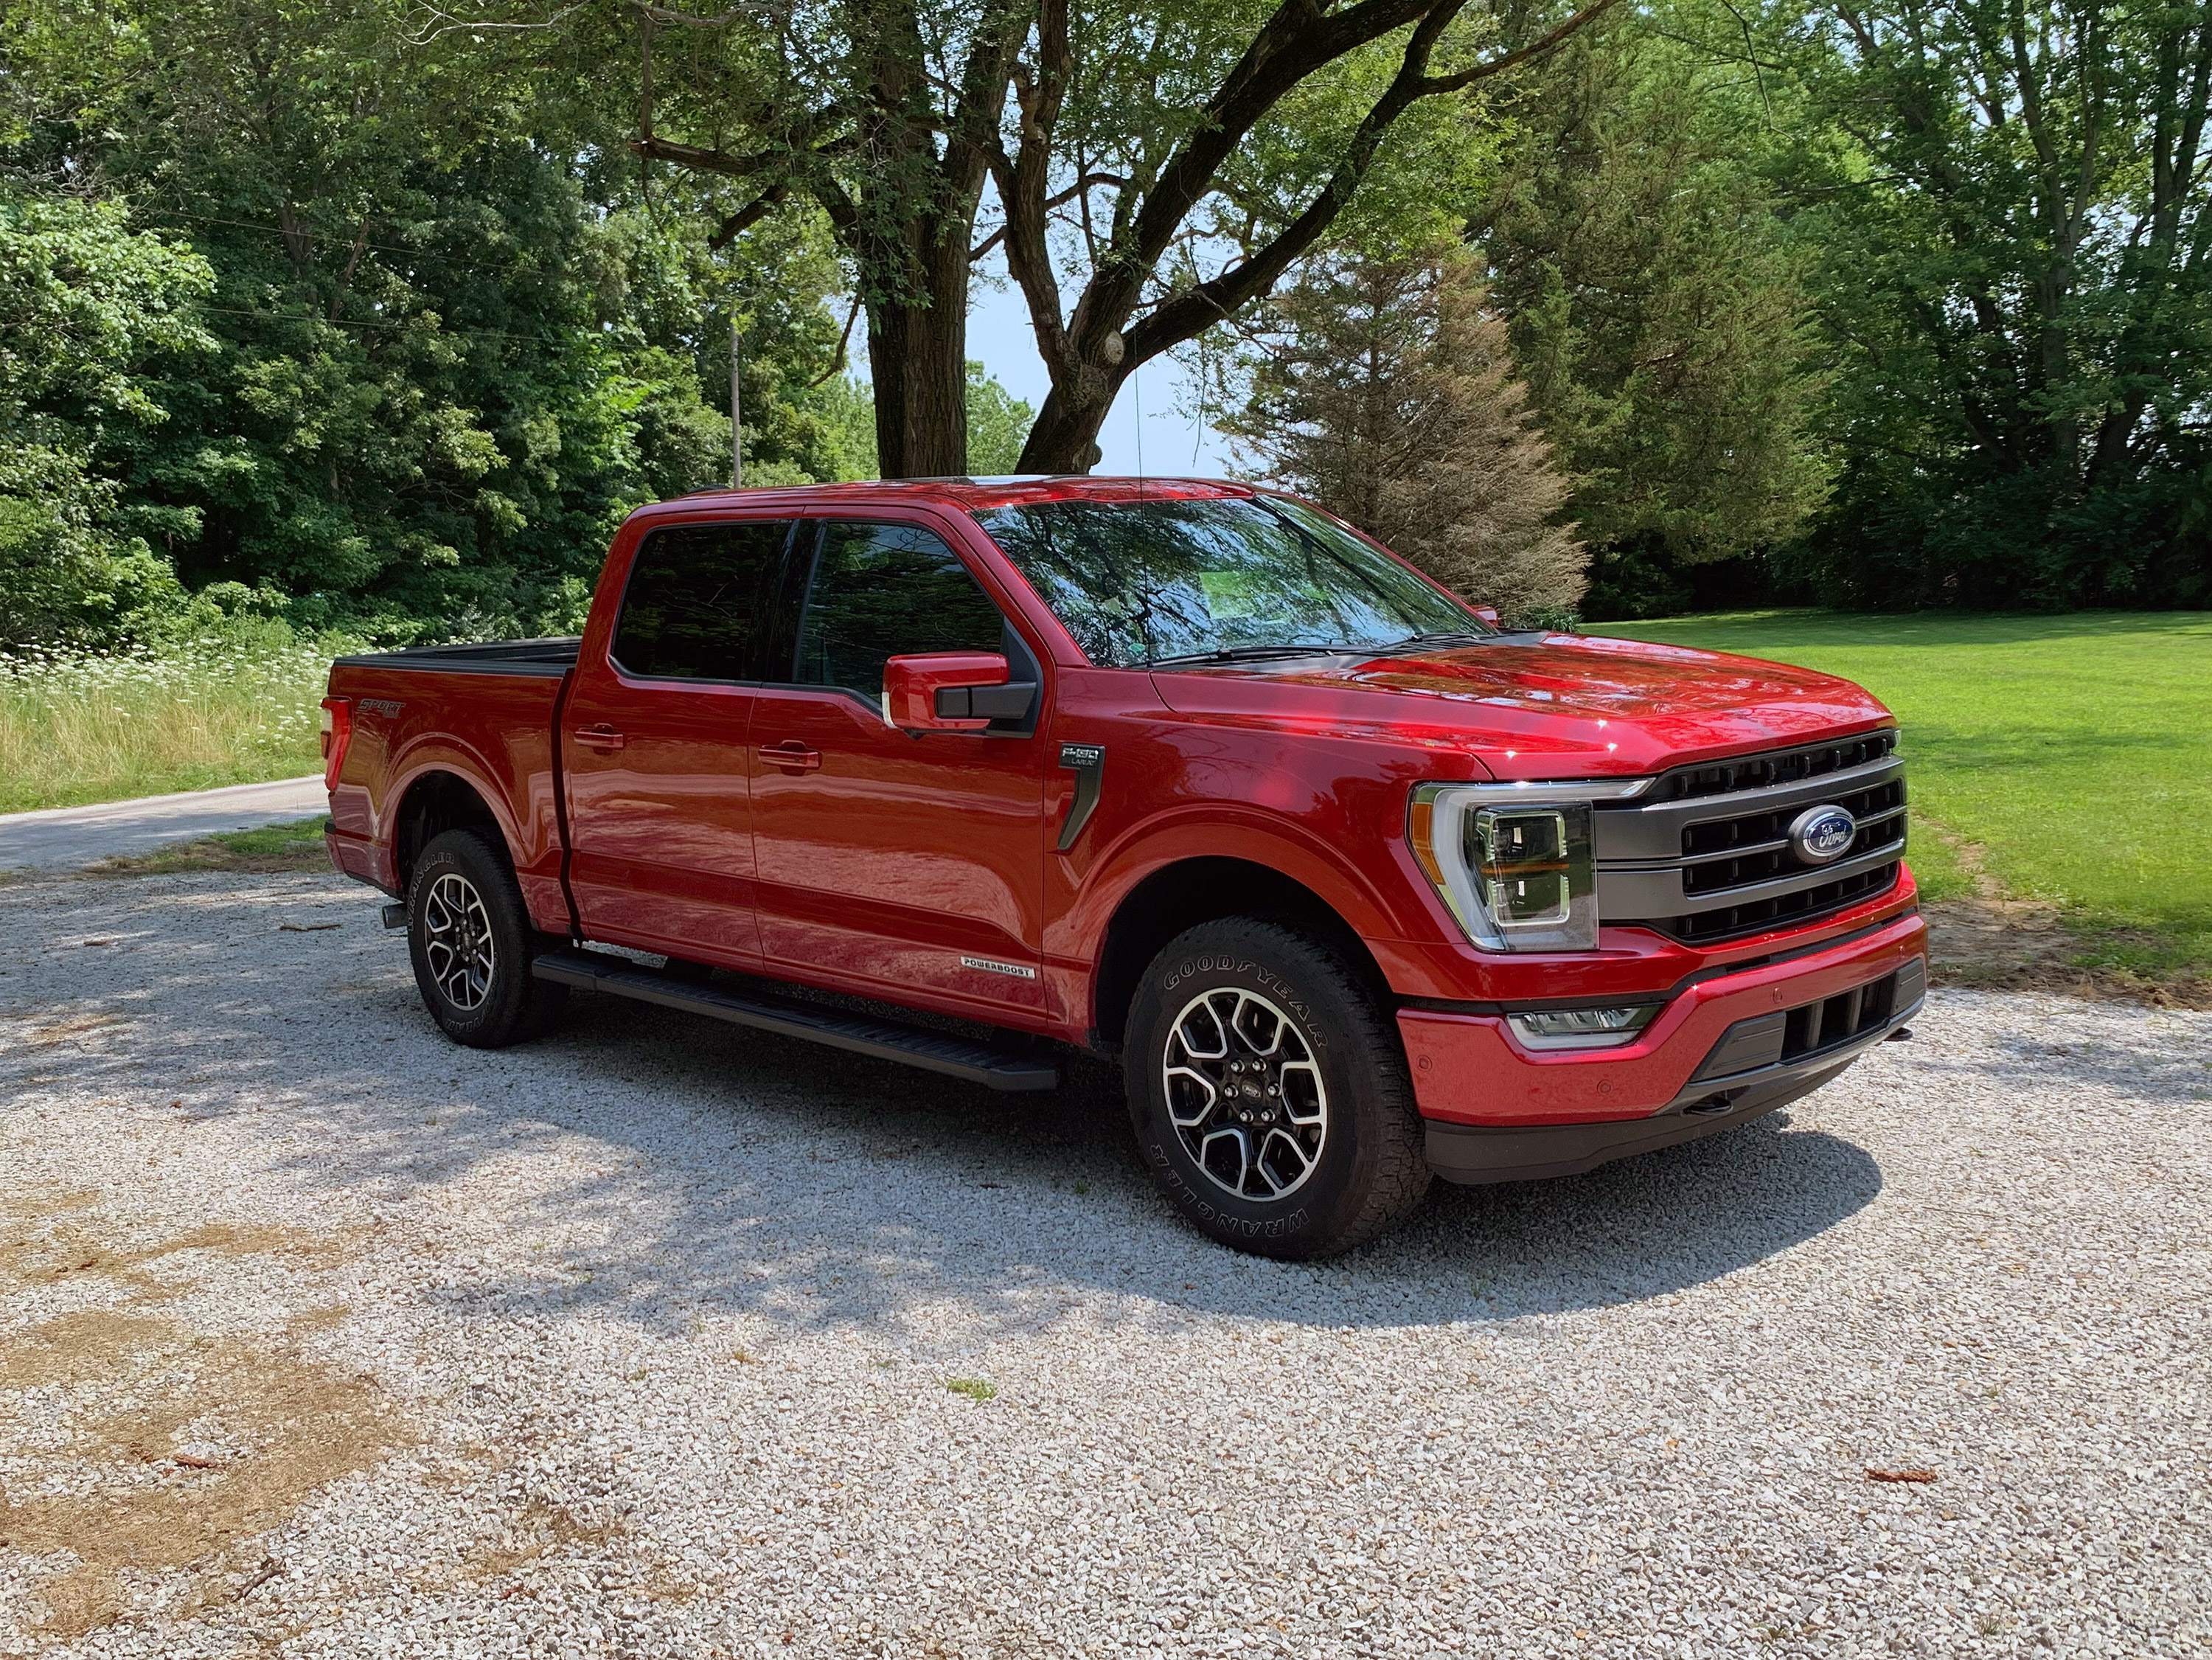 America's favorite truck goes hybrid: The Ford F-150, reviewed